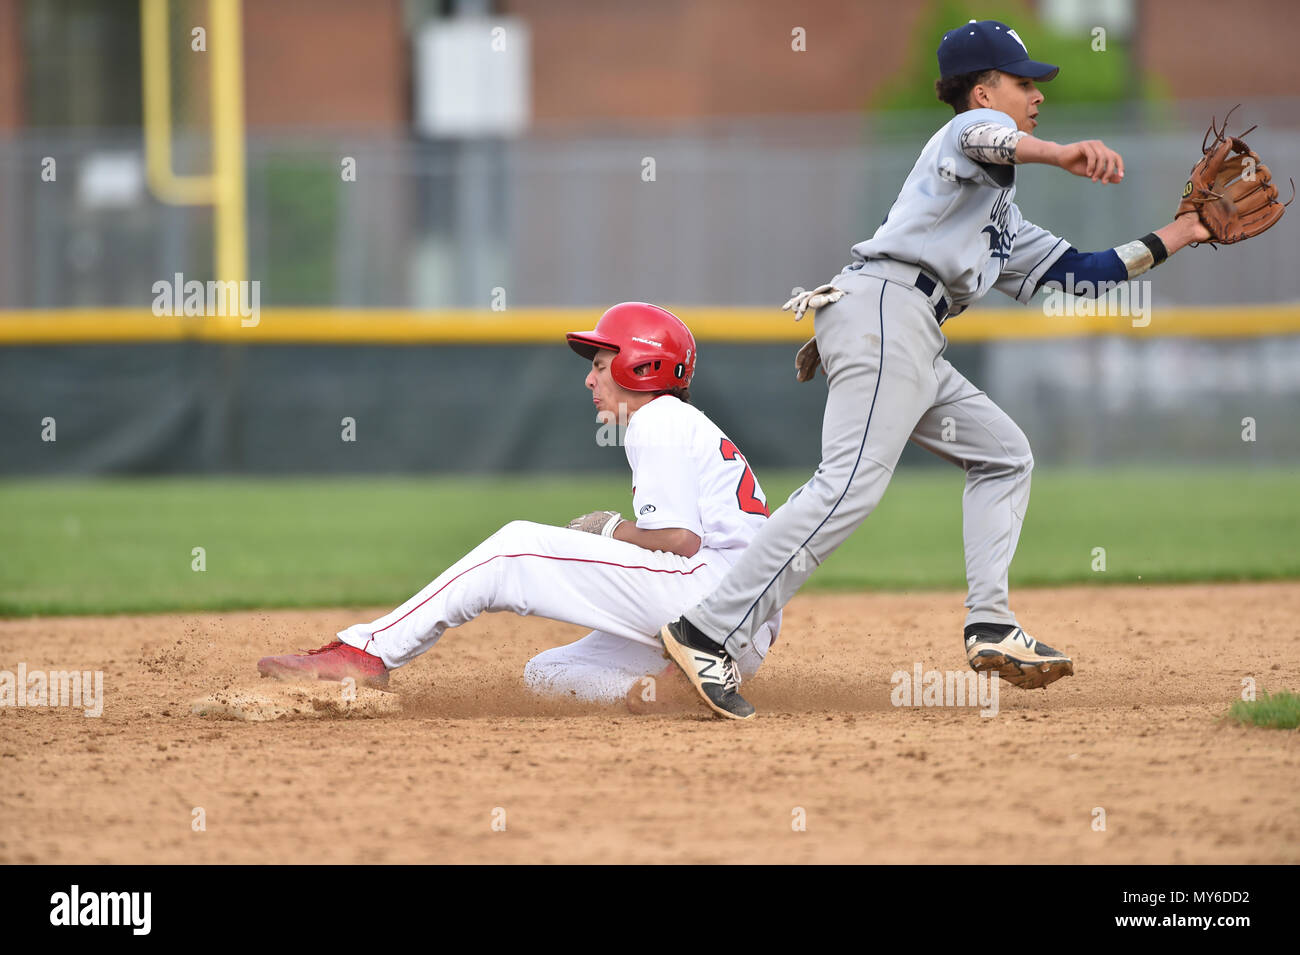 Middle infielder accepting a throw to late to prohibit an opponent base runner from stealing second base. USA. Stock Photo